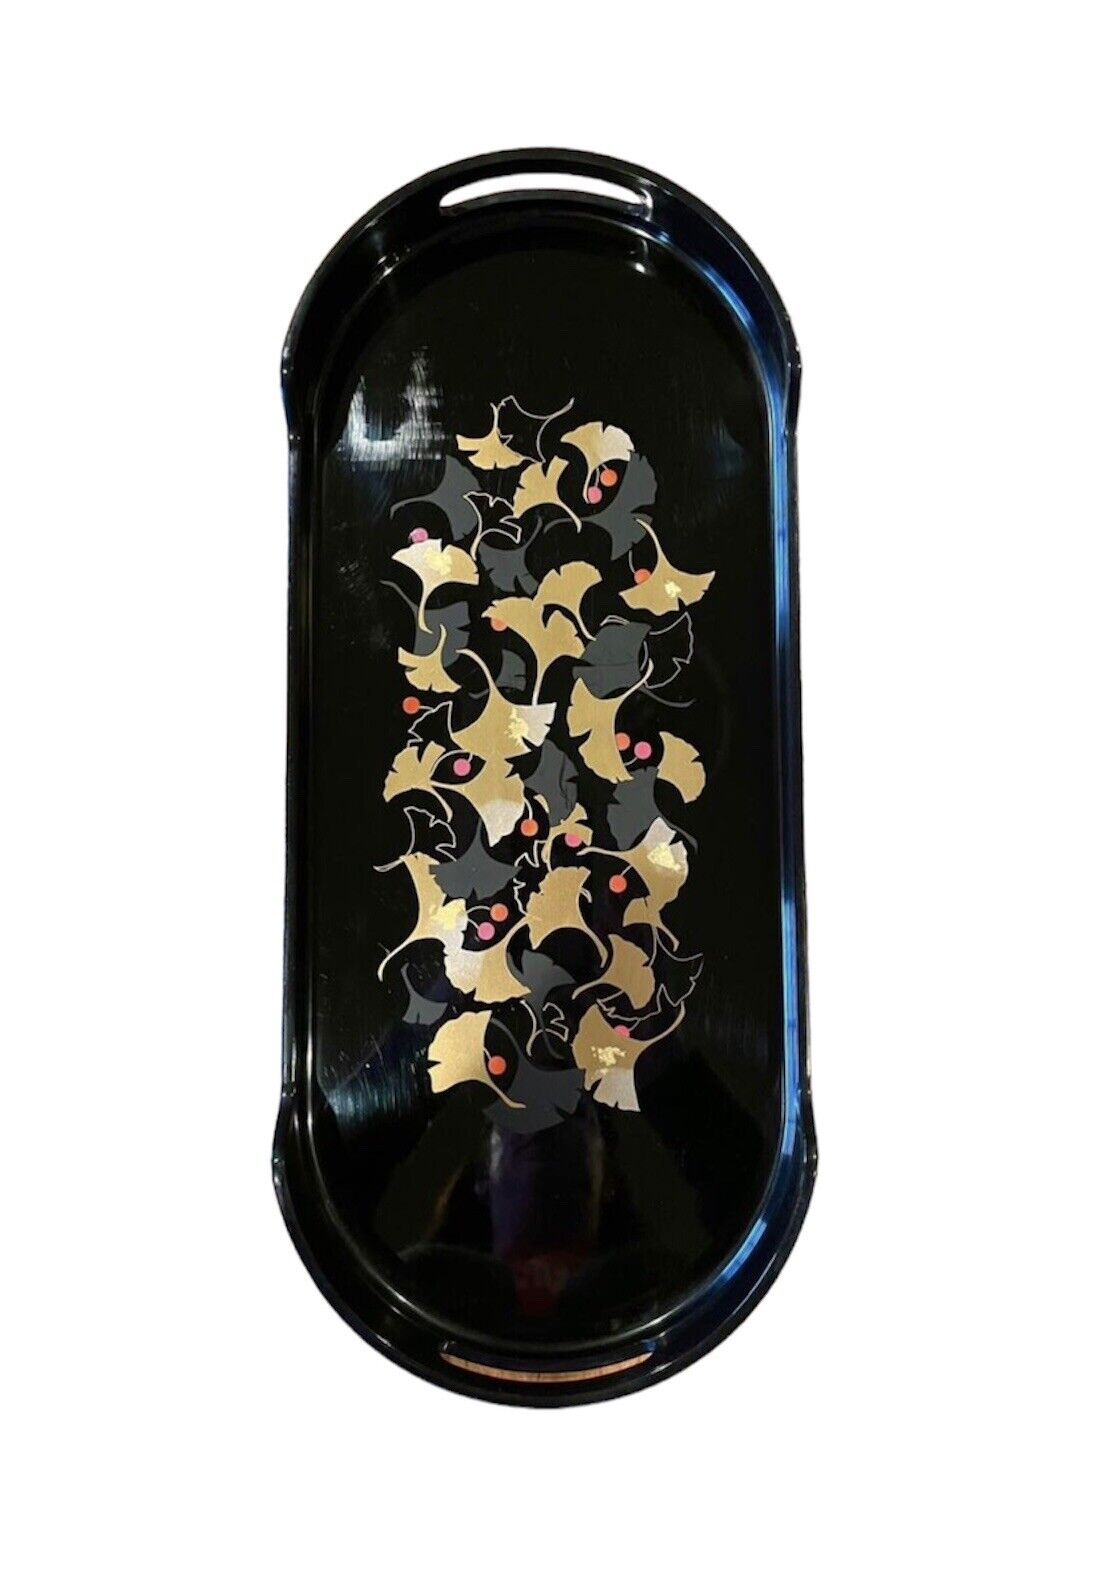 Vintage mid-century modern Japanese lacquer black with gold gingko leaves